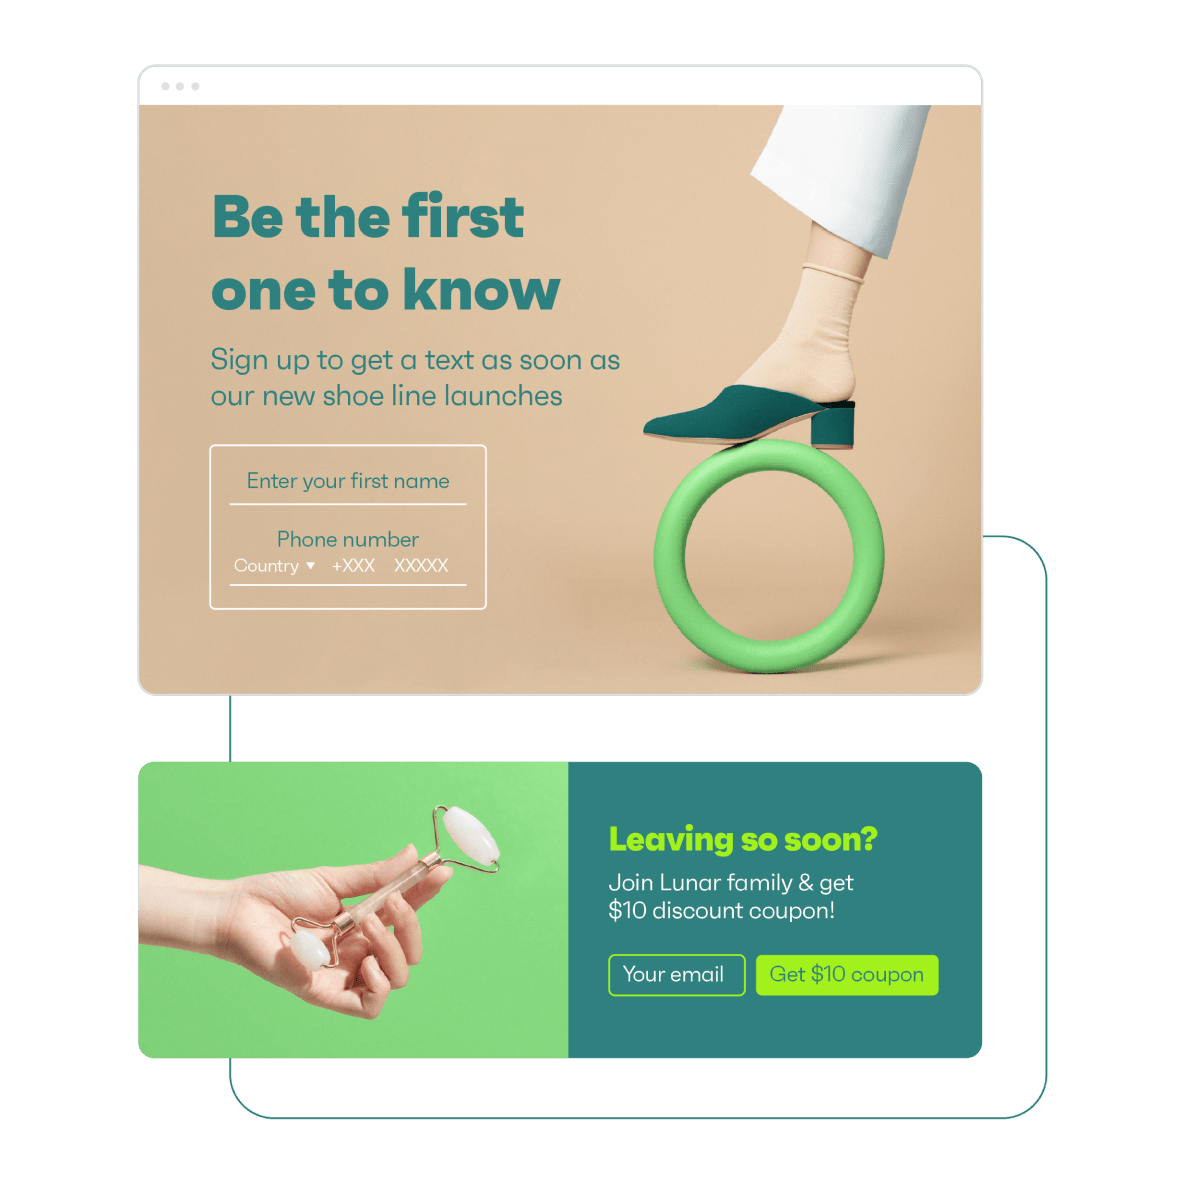 Convert your visitors the first time